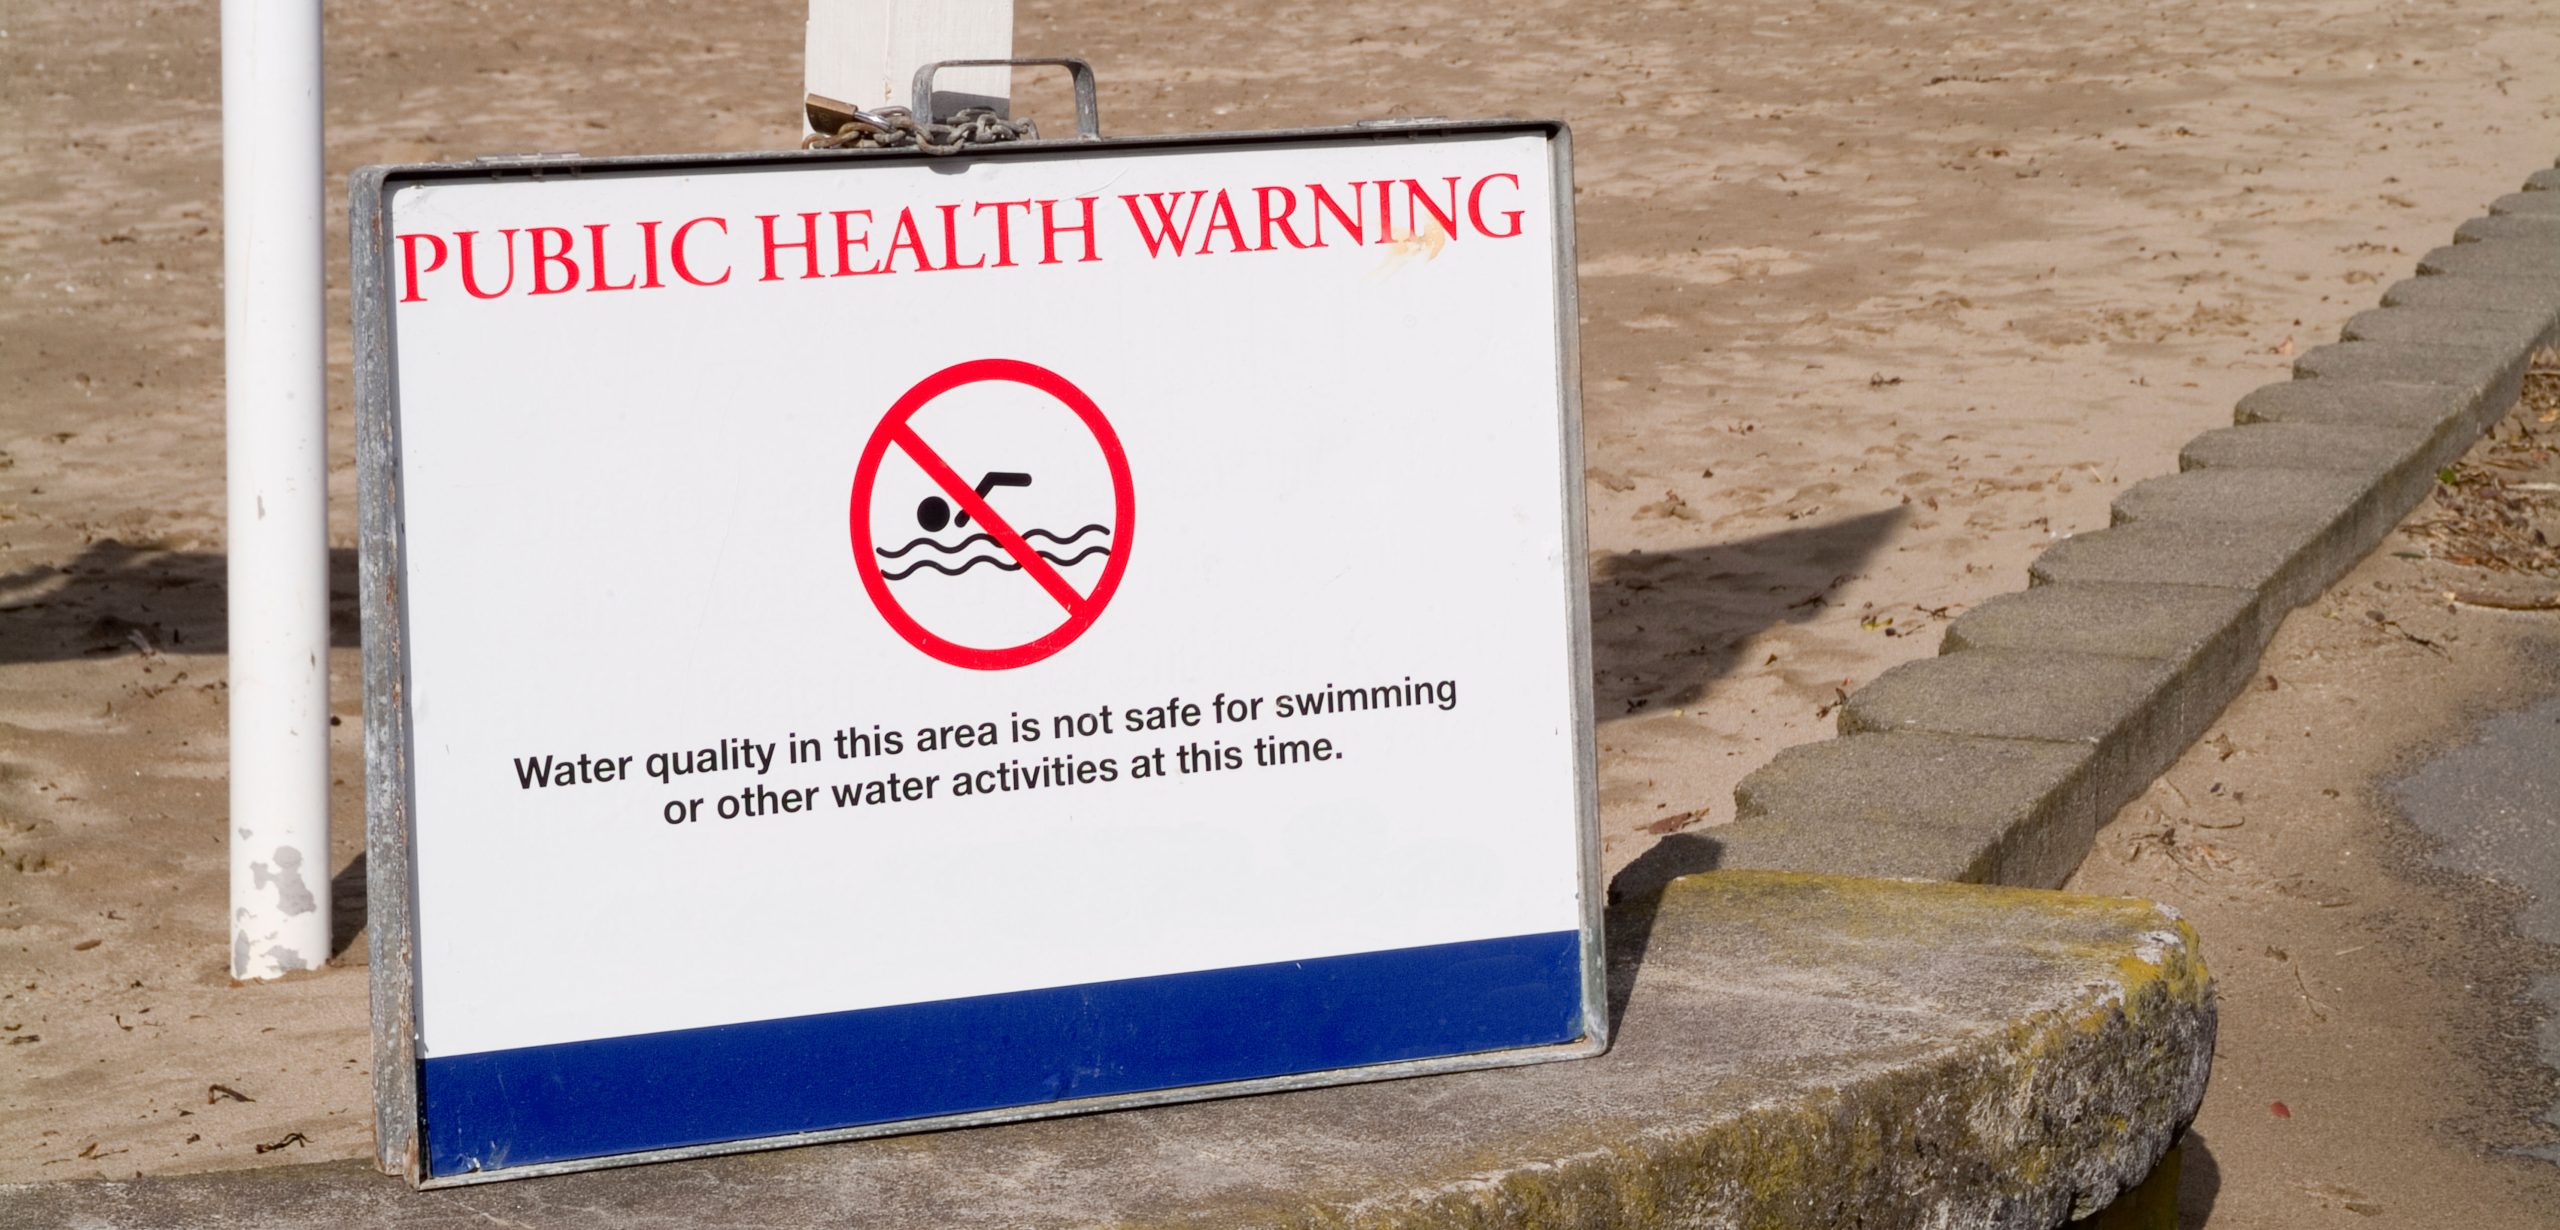 Watch out for fecal bacteria in the sand. Photo by Karel Lorier/Alamy Stock Photo